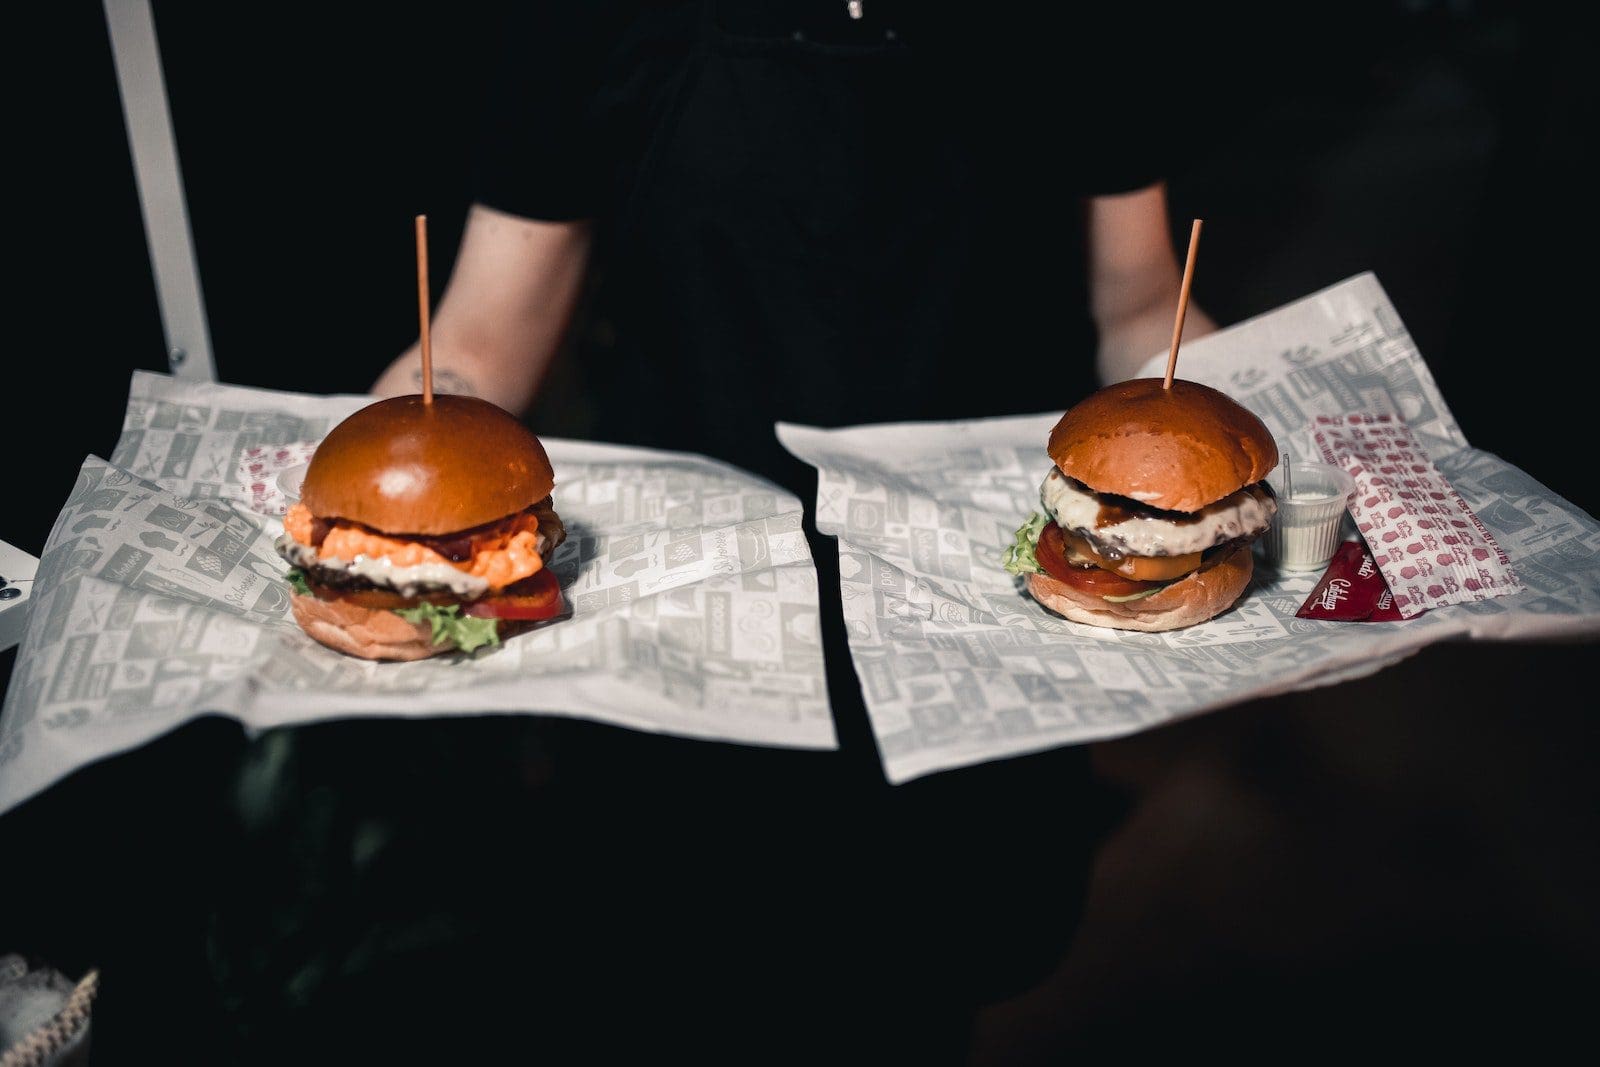 Symmetrical View of a Waiter Carrying Two Burgers